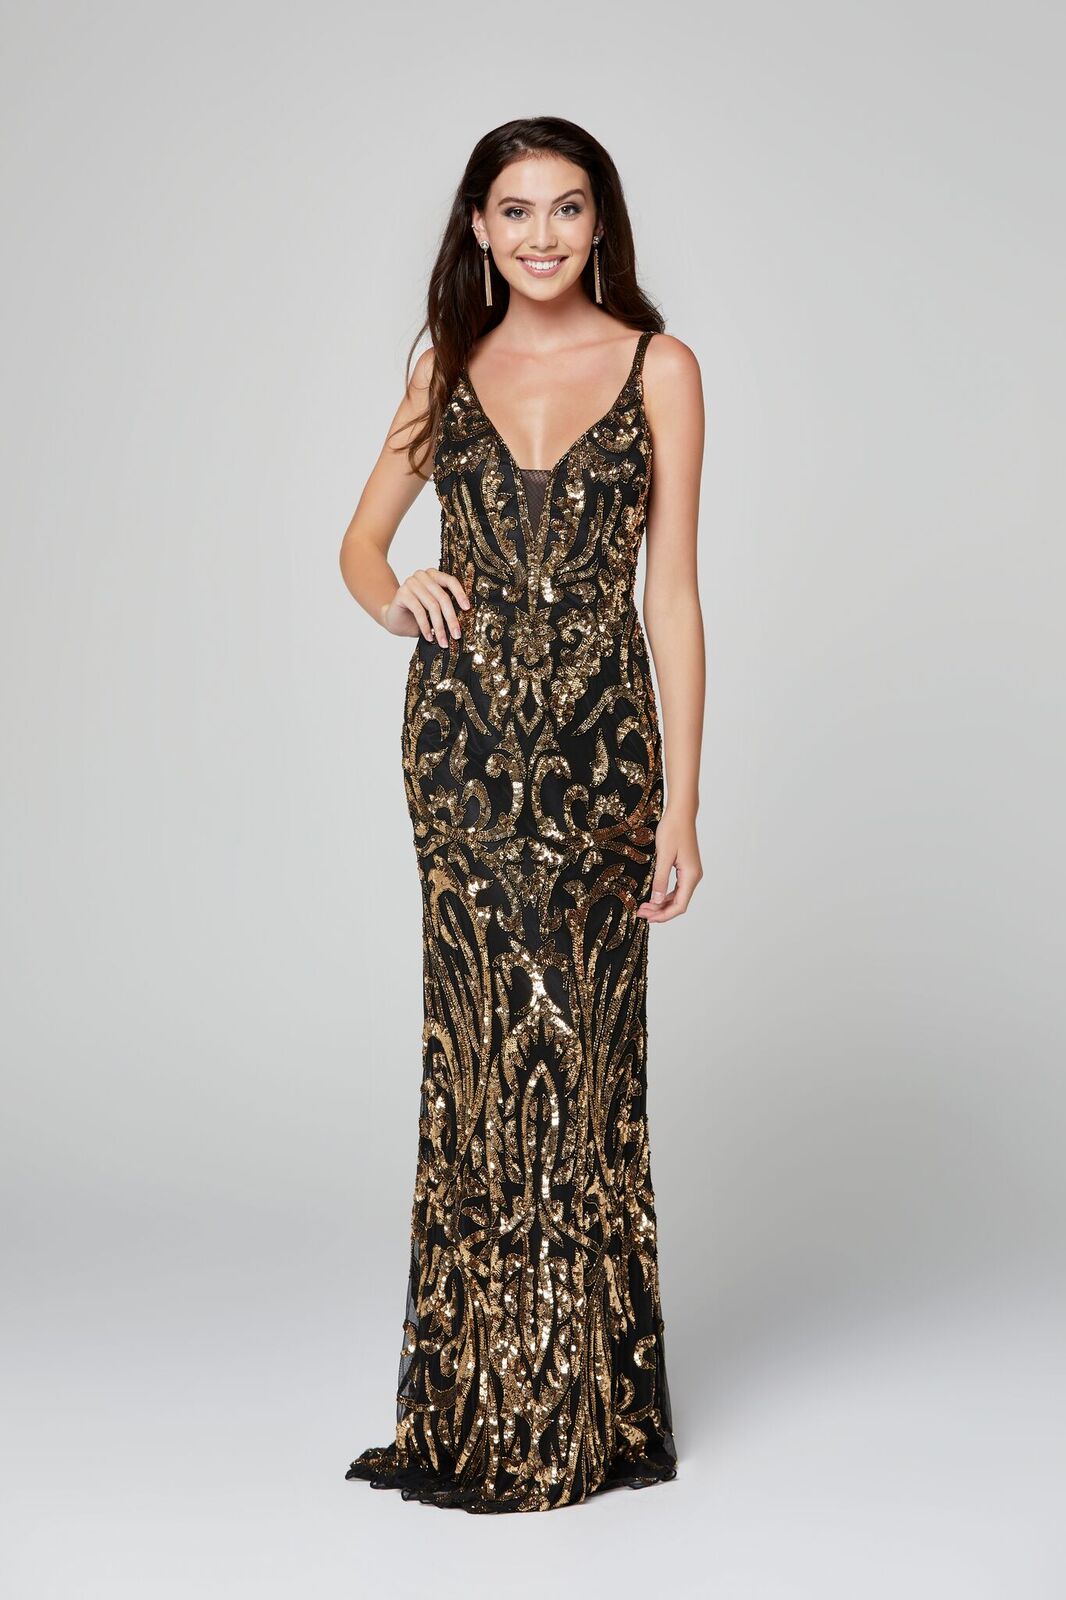 Primavera Couture 3454 is a Sequin Designer Prom, Pageant & Formal Dress. Featuring a Plunging V neckline with mesh panel. Embellished sequins & Hand beading along the entire gown in a damask print. Great evening gown. Open scoop back.